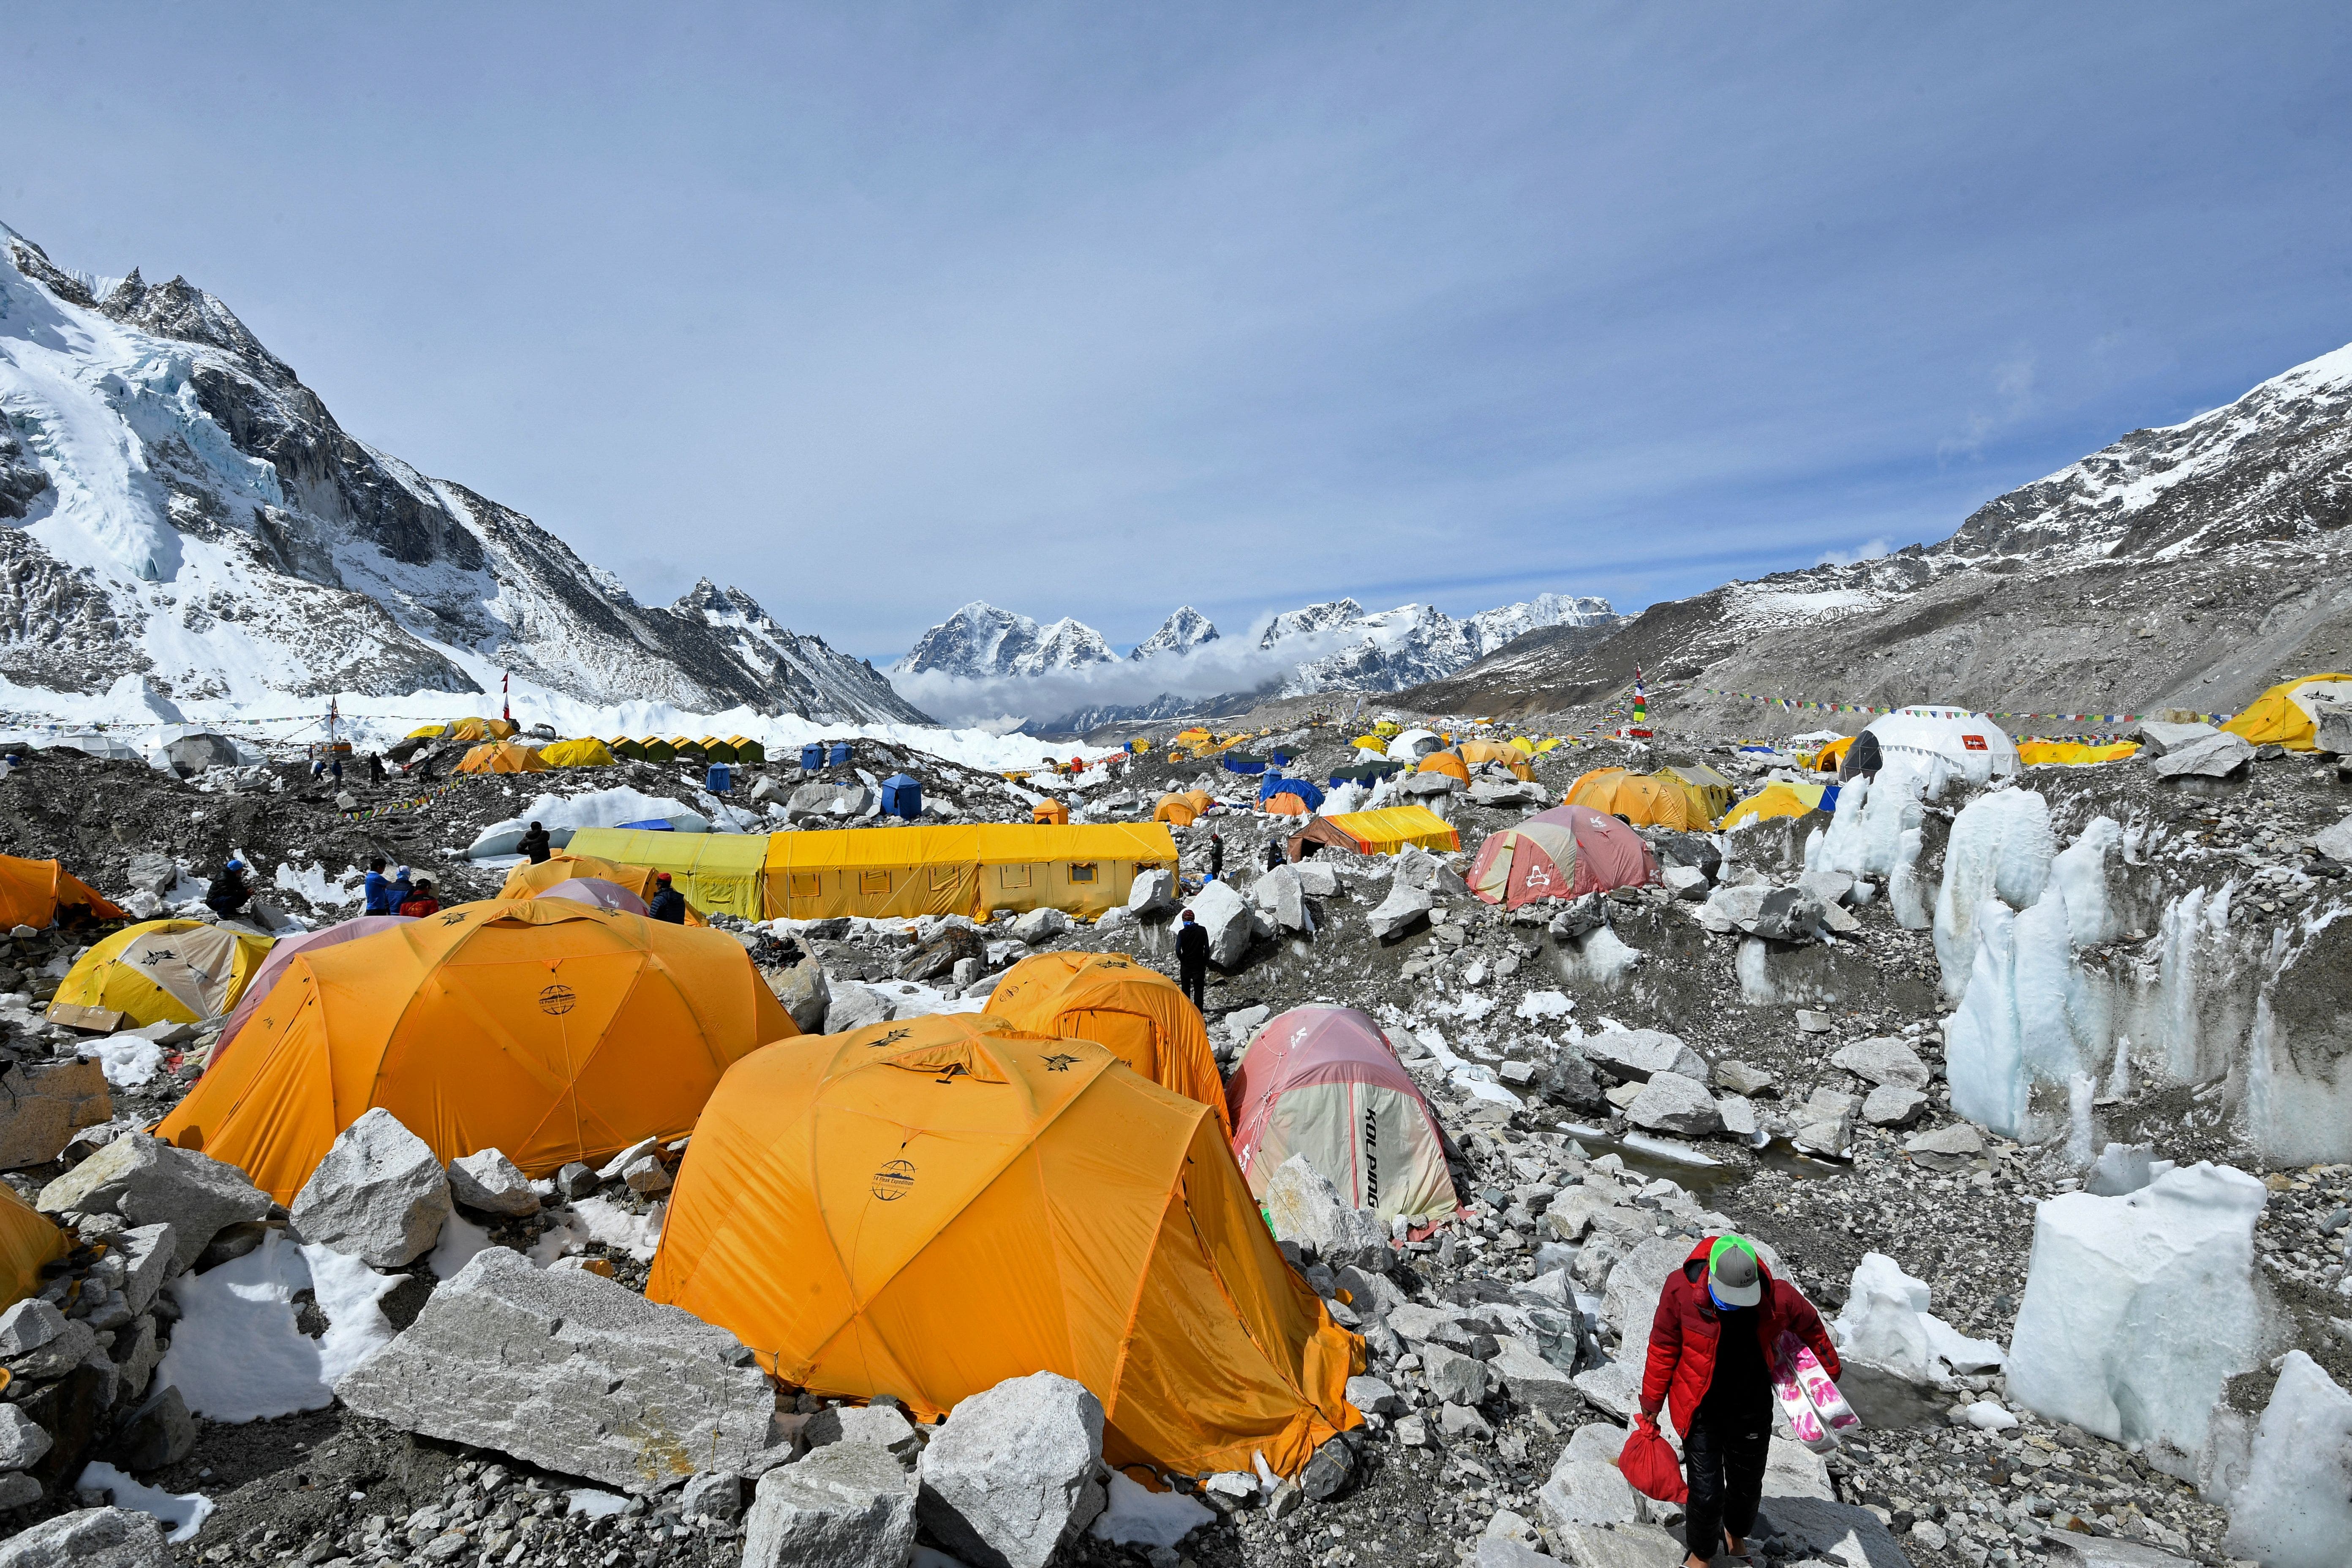 Should Nepal move Everest’s base camp in the face of climate crisis? The sherpas don’t think so